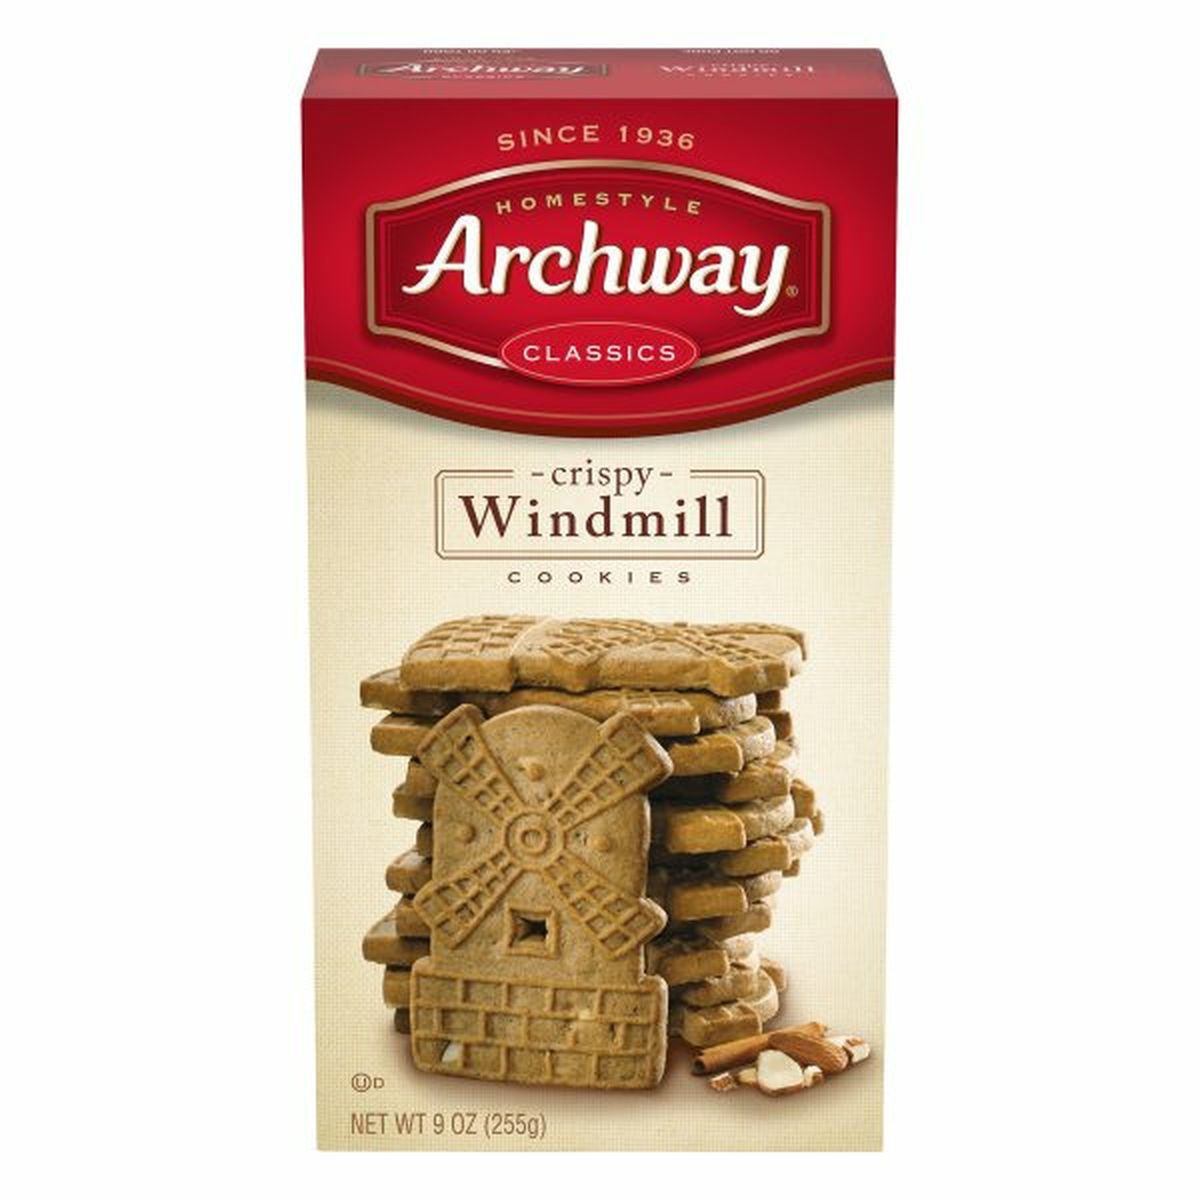 Calories in Archways Cookies, Windmill, Crispy, Homestyle